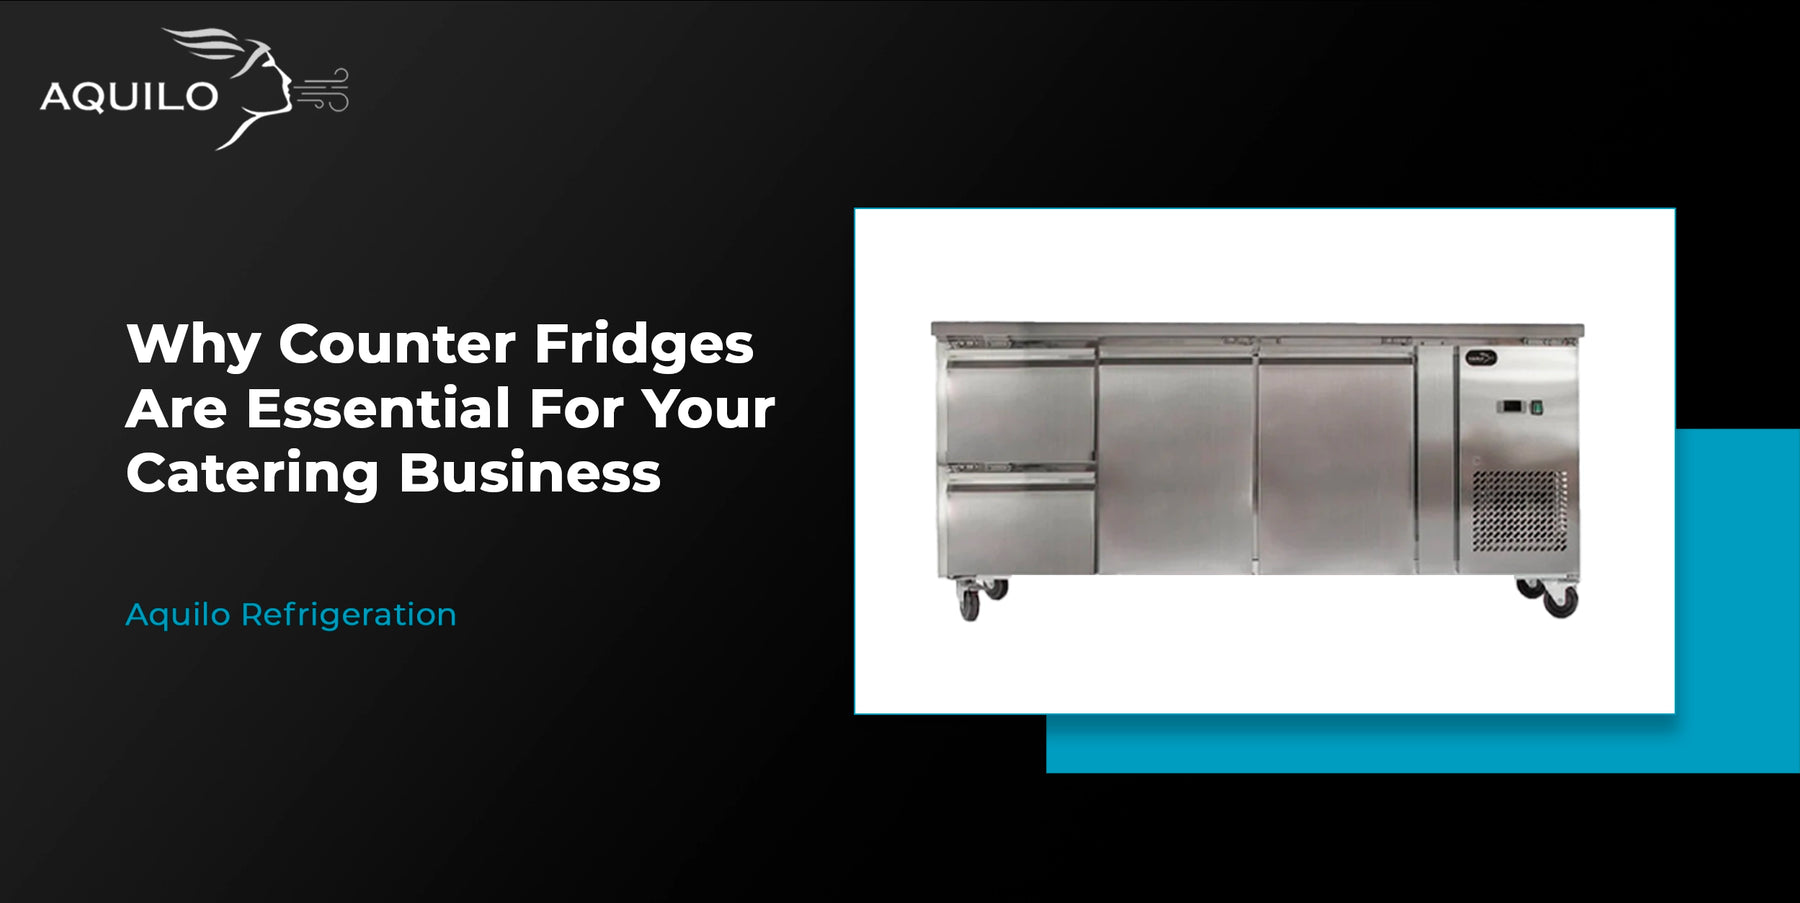 Why Counter Fridges Are Essential for Your Catering Business